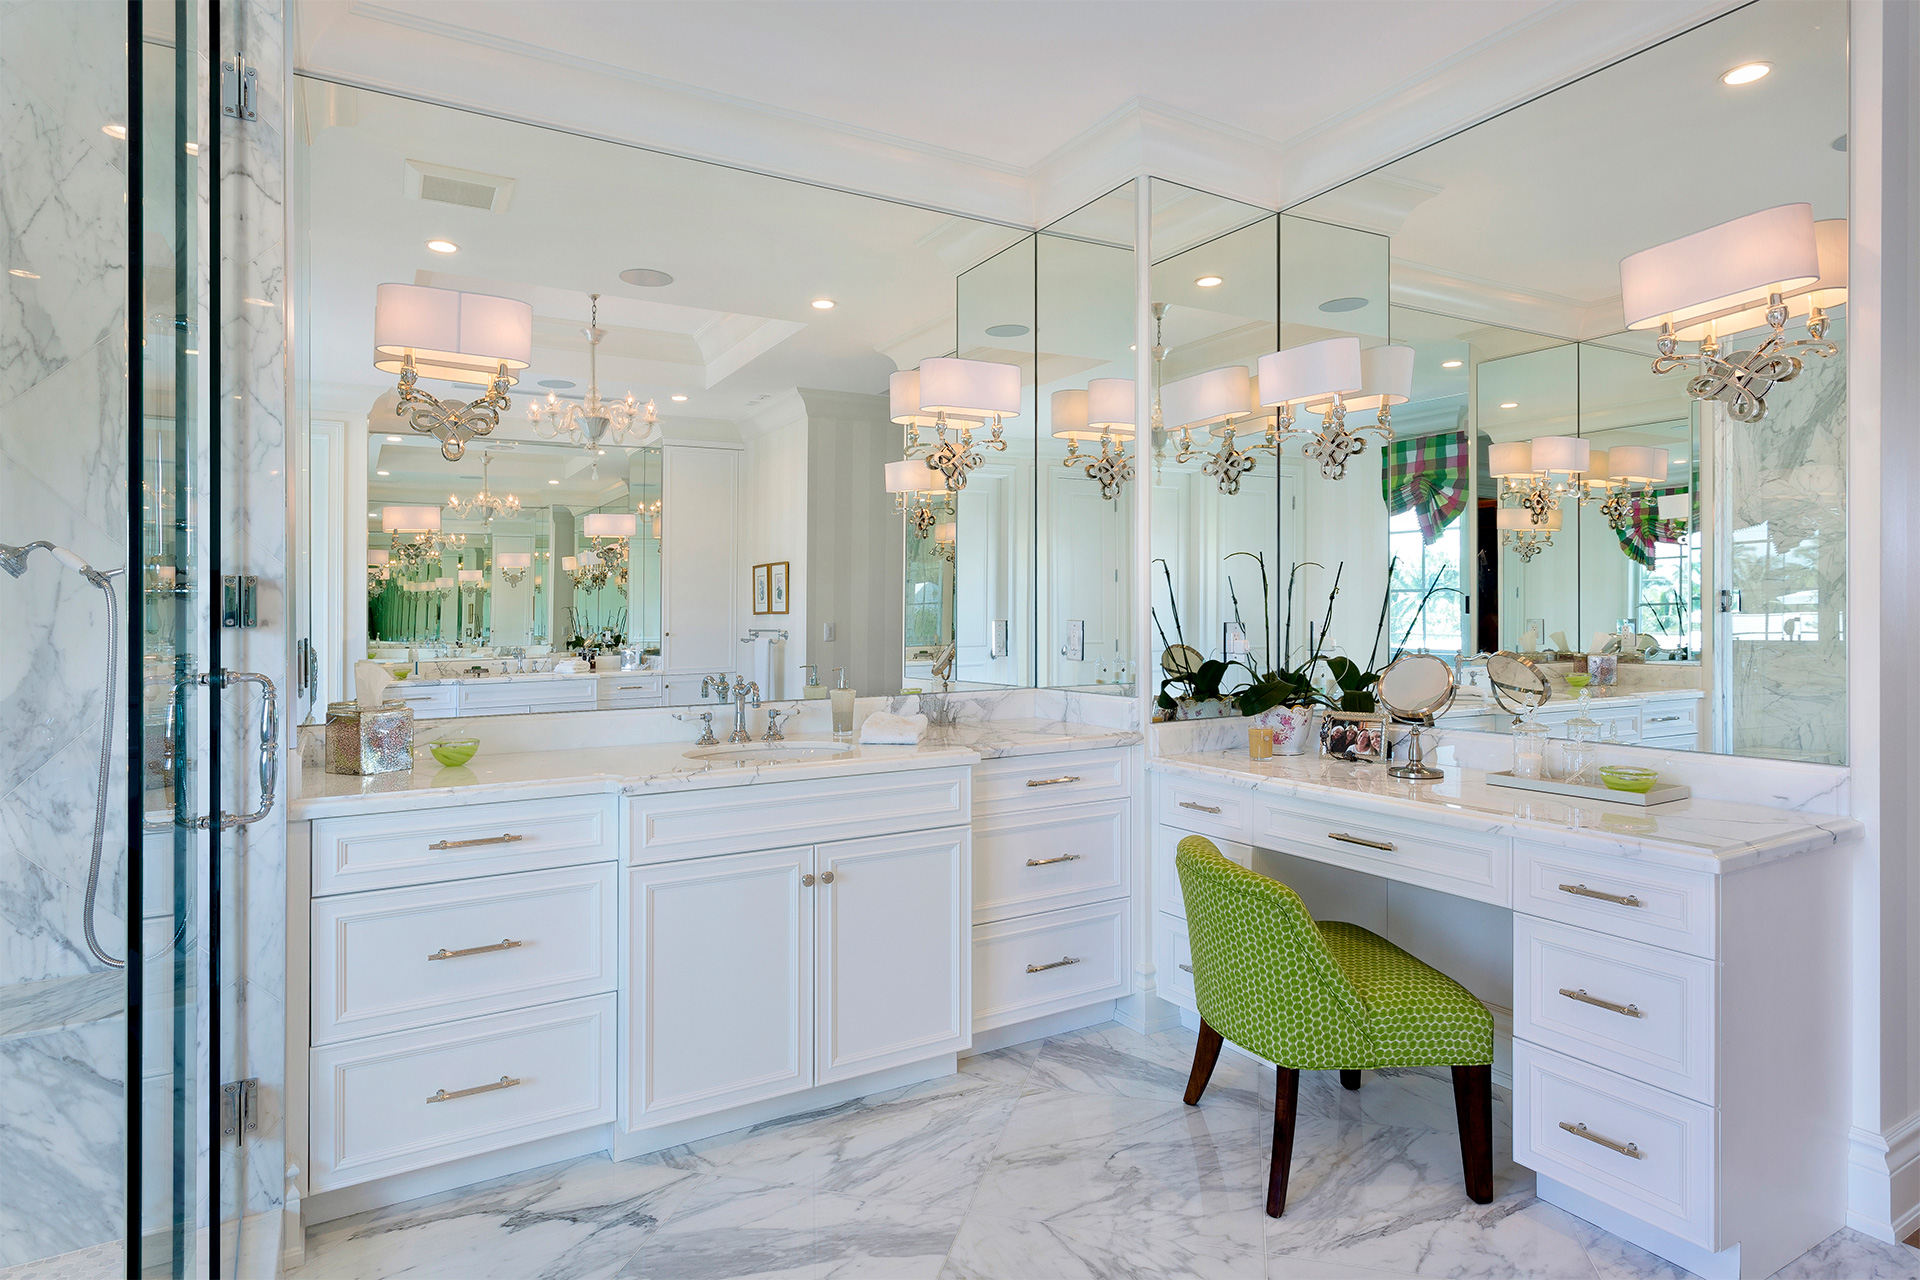 The Place For Kitchens and Baths South Florida Interior Design Interior Designer Bathroom Design Kitchen Design Mirror Mounted Sconces Transitional Style